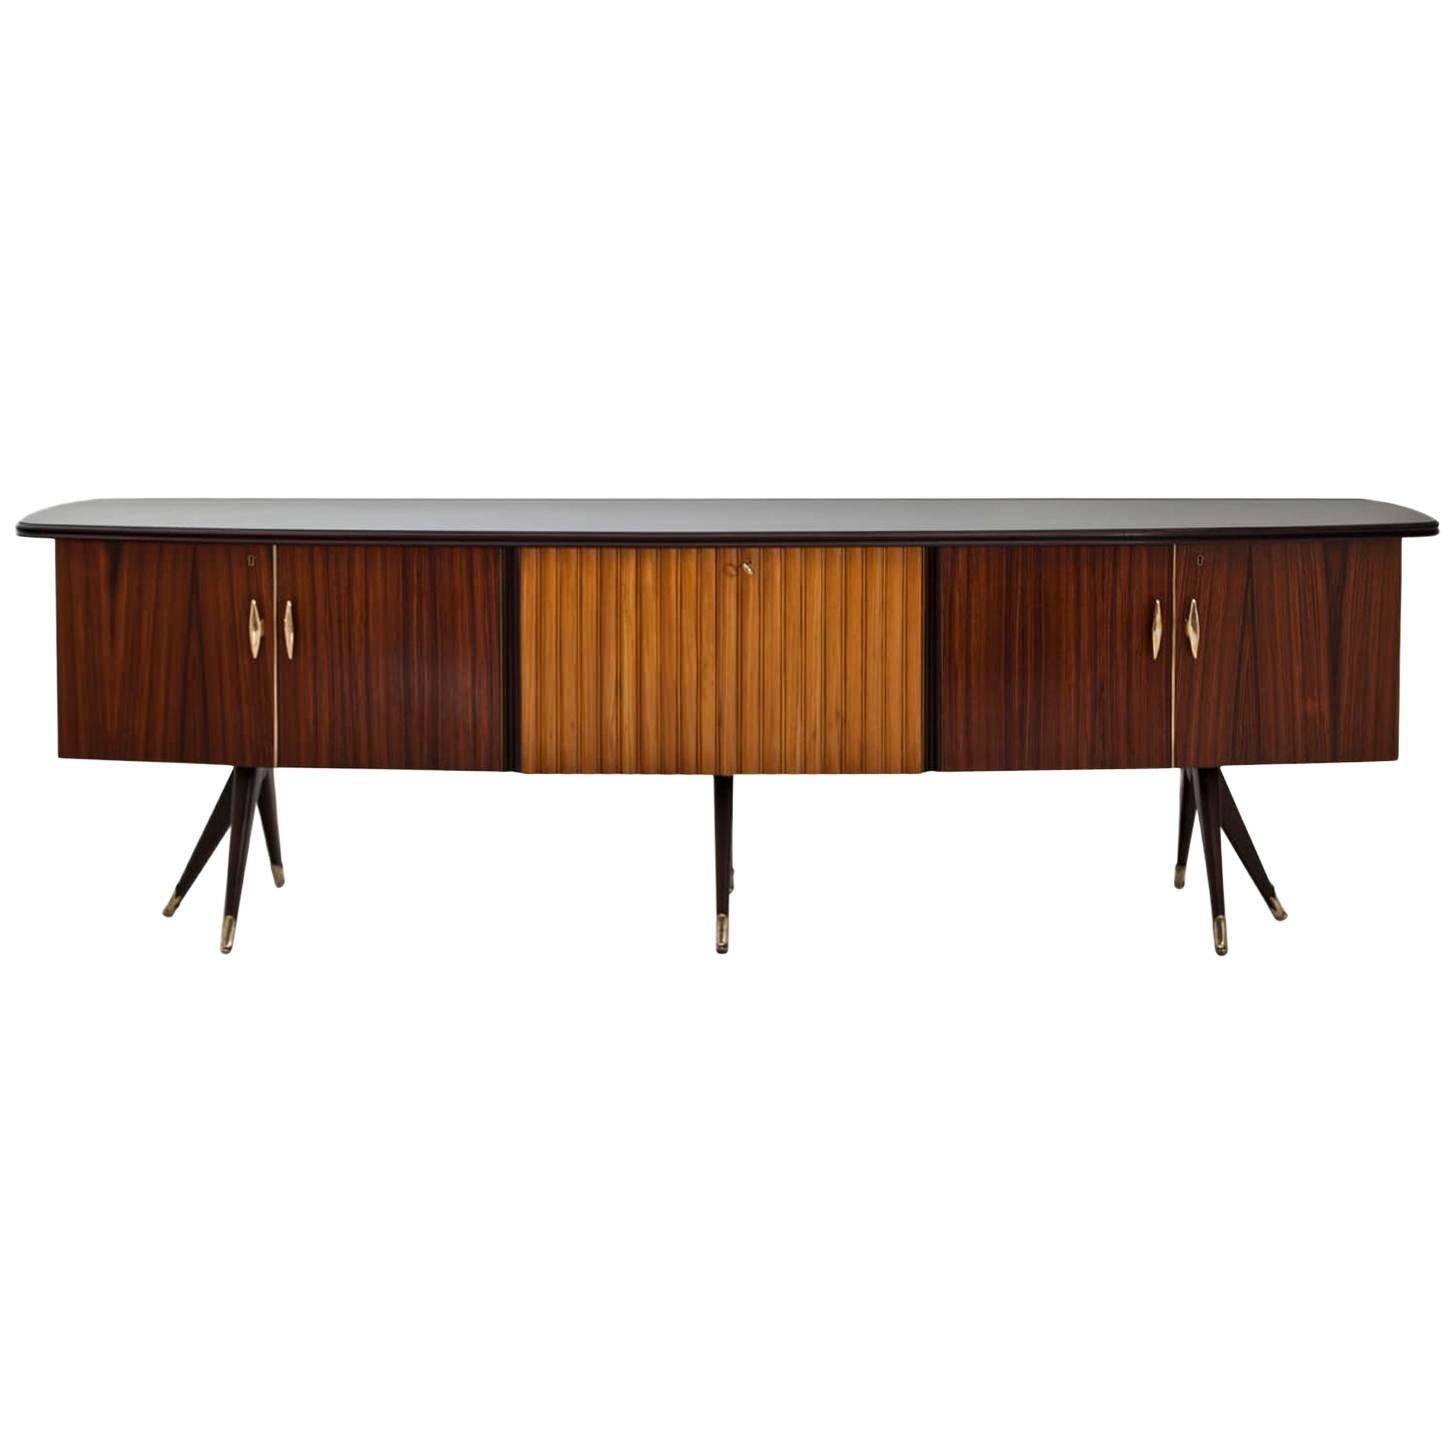 Sideboard in the Style of Dassi, Italy Mid-20th Century